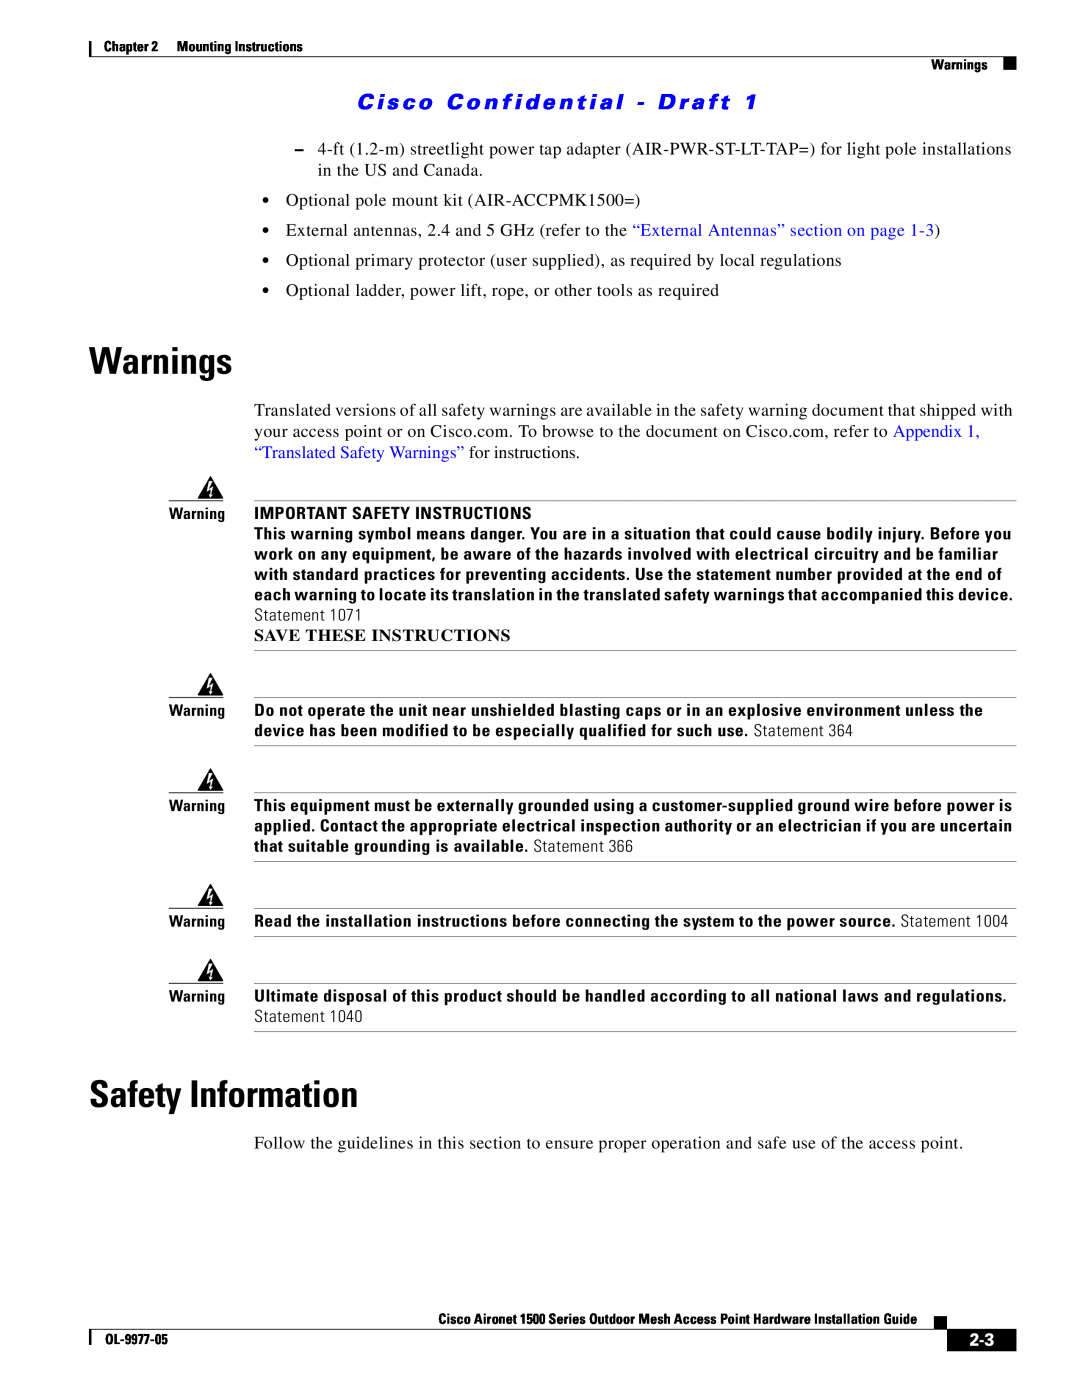 Cisco Systems 1500 Series manual Warnings, Safety Information, Save These Instructions 